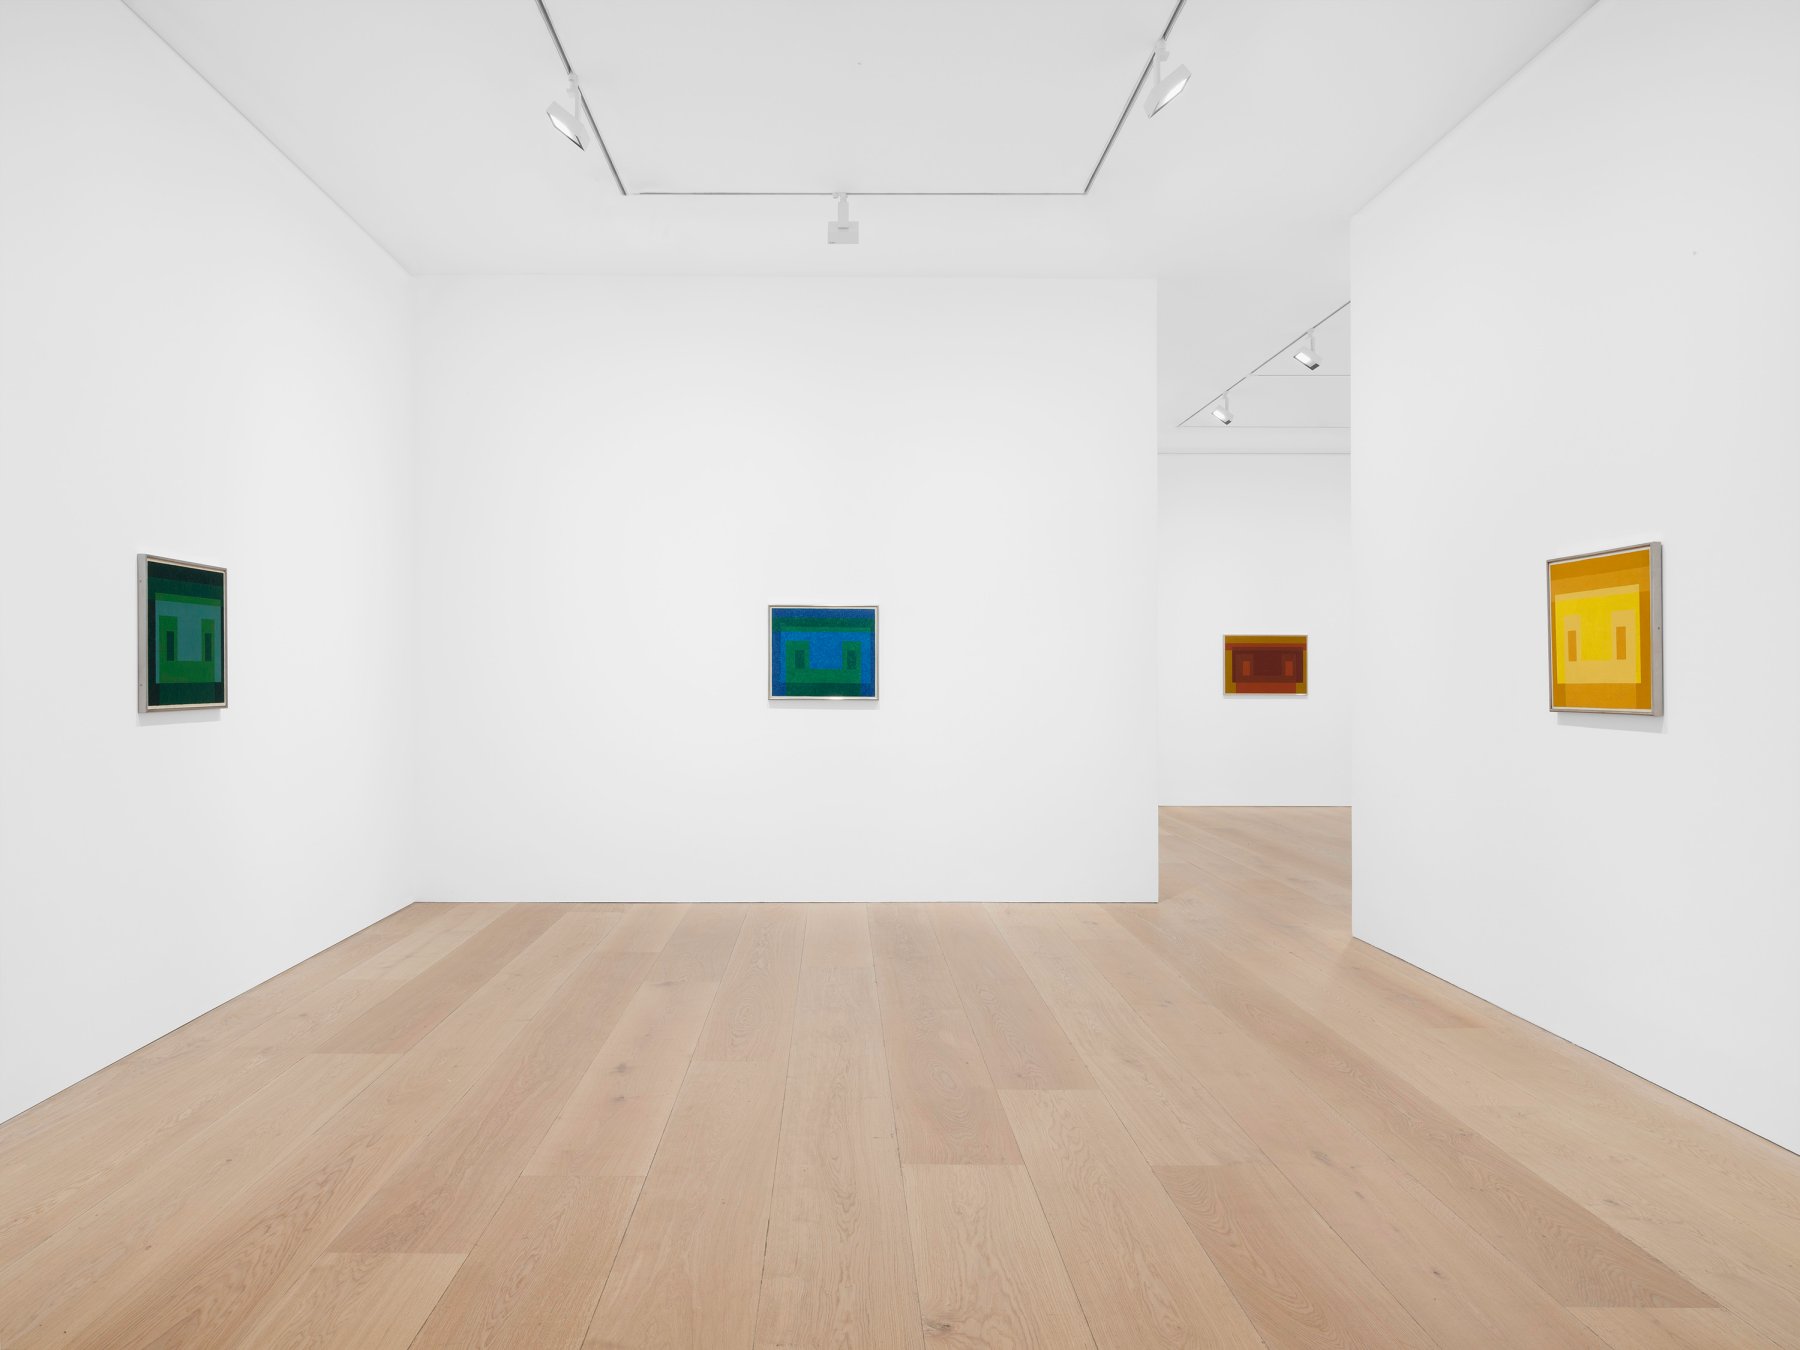 Installation image for Josef Albers: Paintings Titled Variants, at David Zwirner